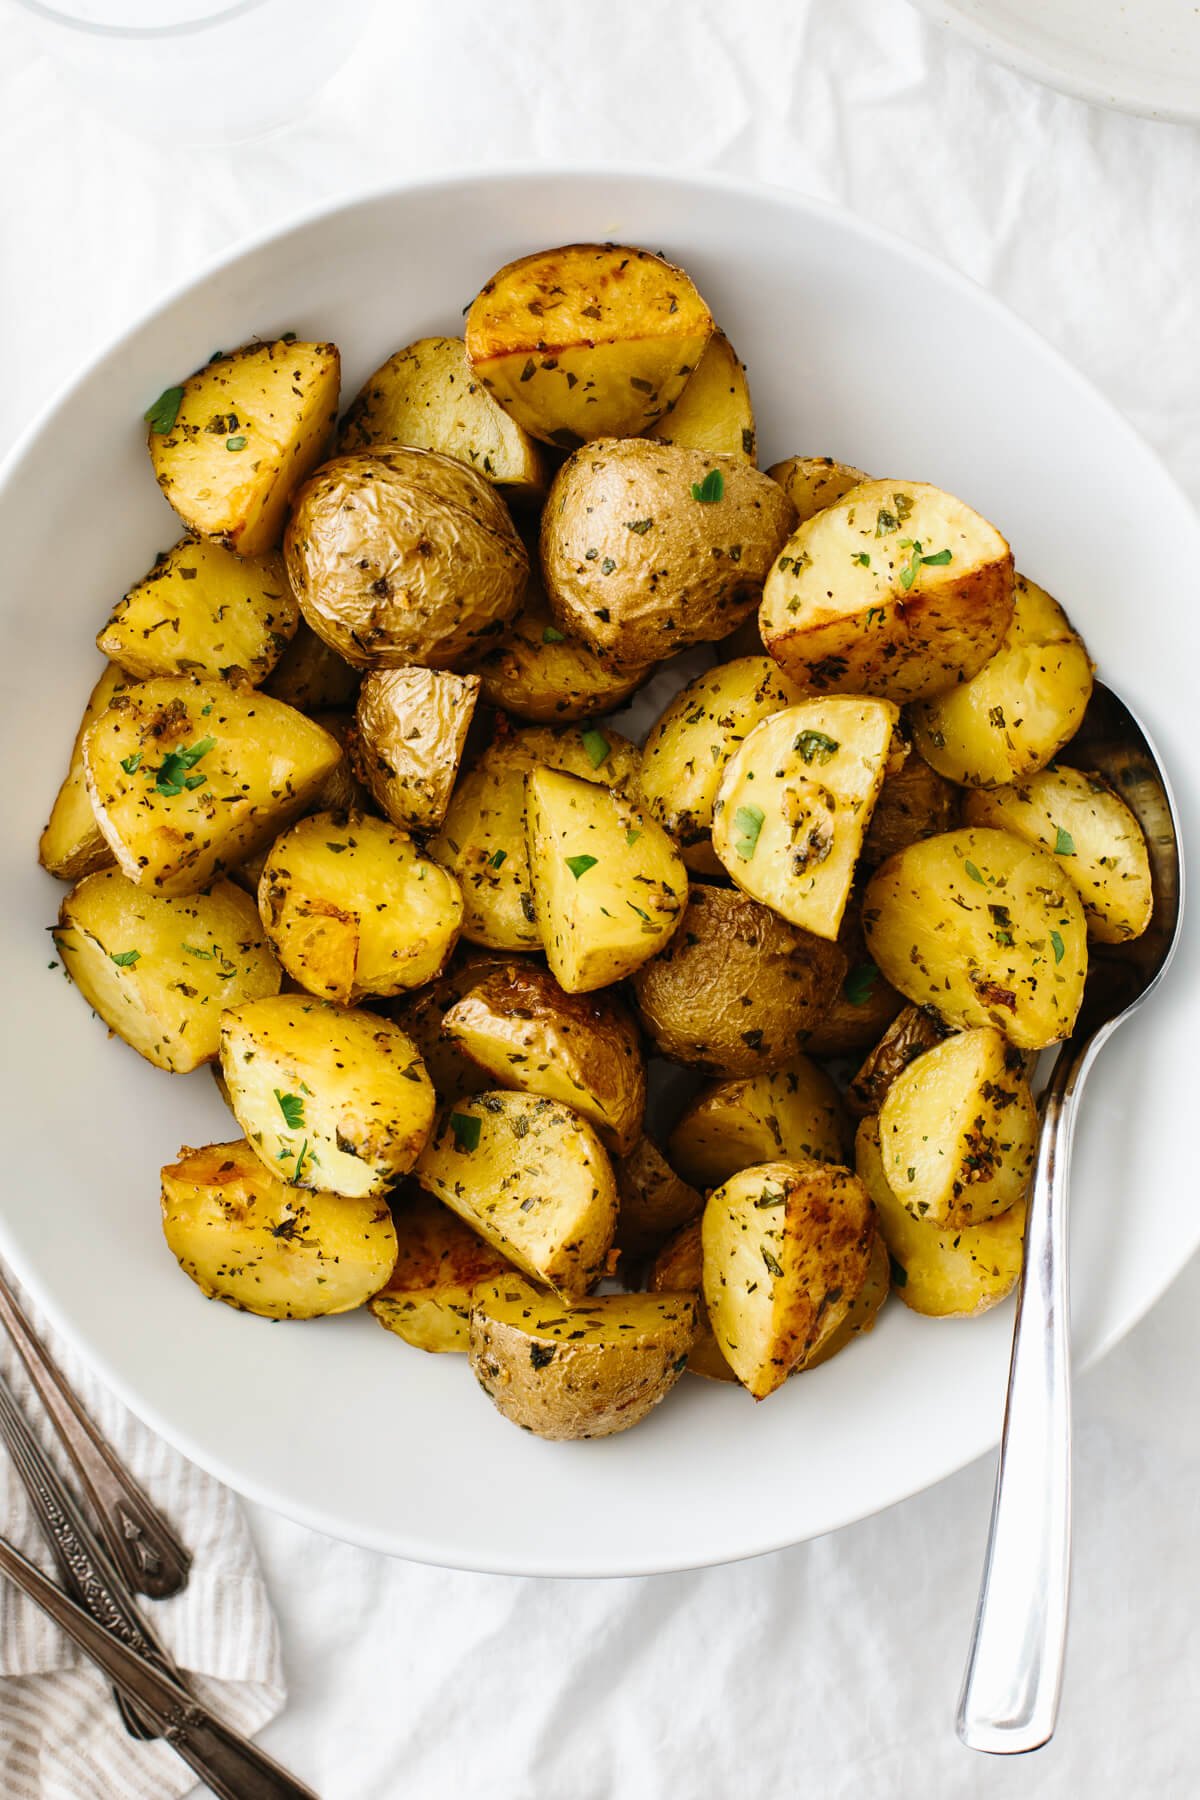 Garlic herb roasted potatoes in a white serving bowl.